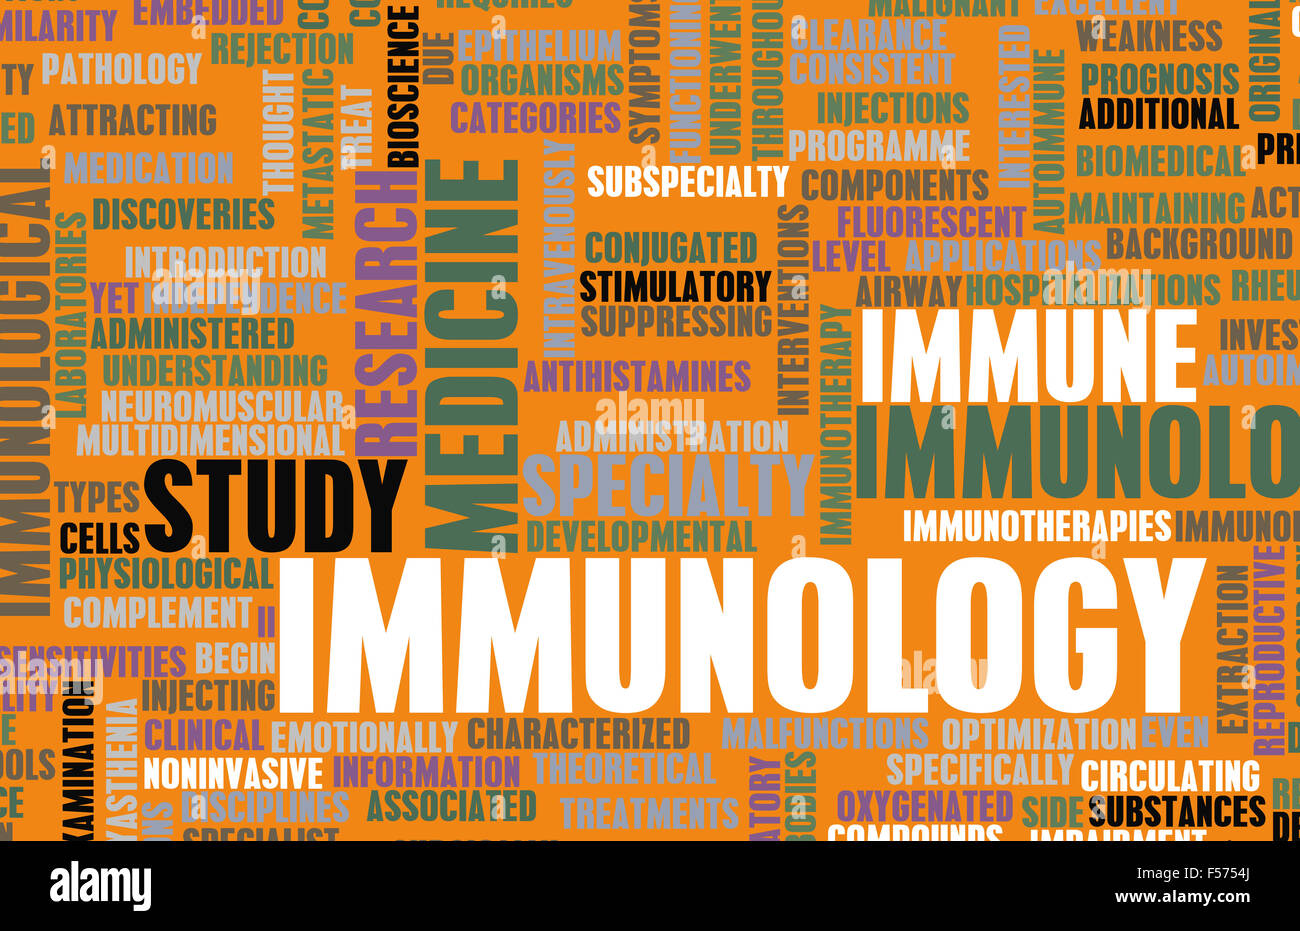 Immunology or Immunologist Medical Field Specialty As Art Stock Photo